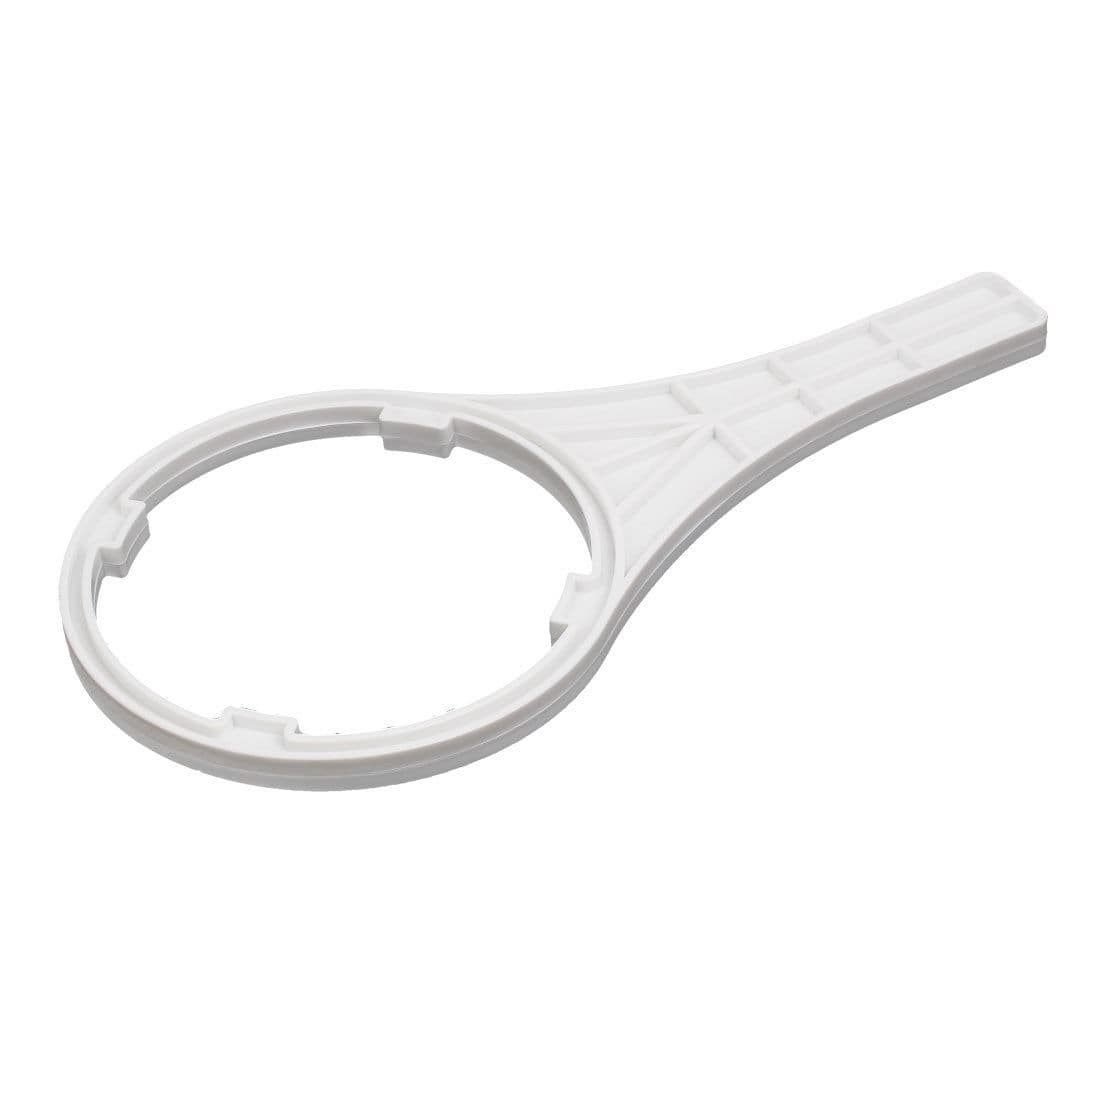 Wrench For Undersink/Benchtop Water Filtration Systems, White Spanner